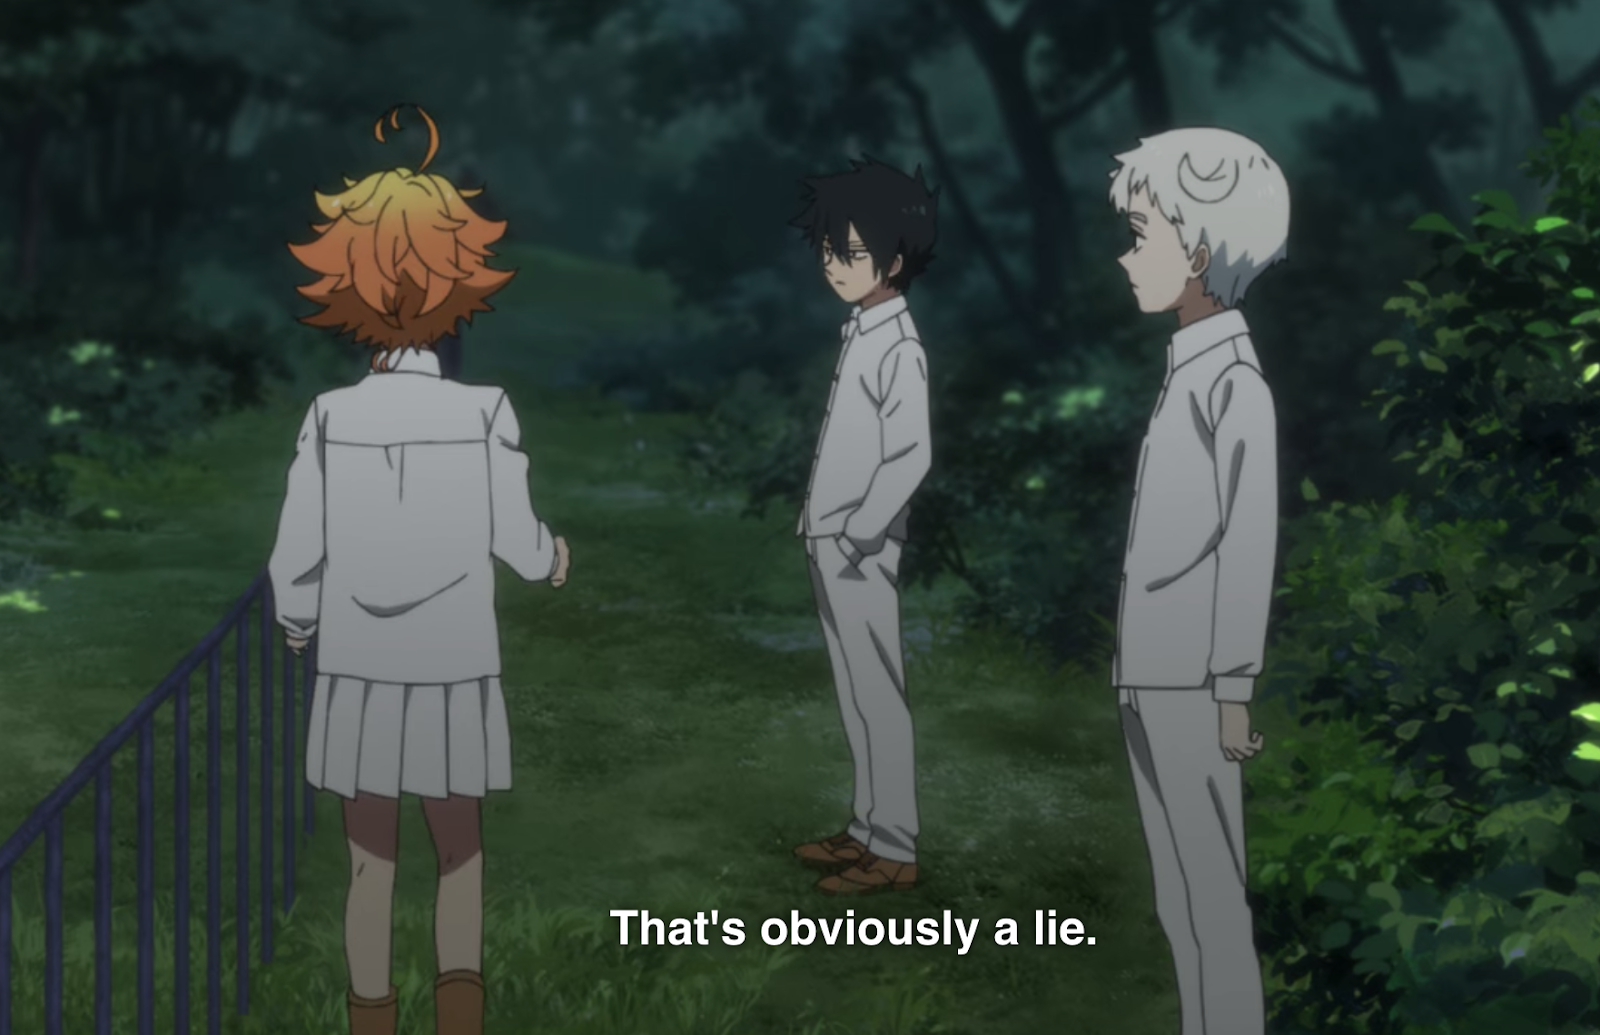 Netflix Anime Review: The Promised Neverland